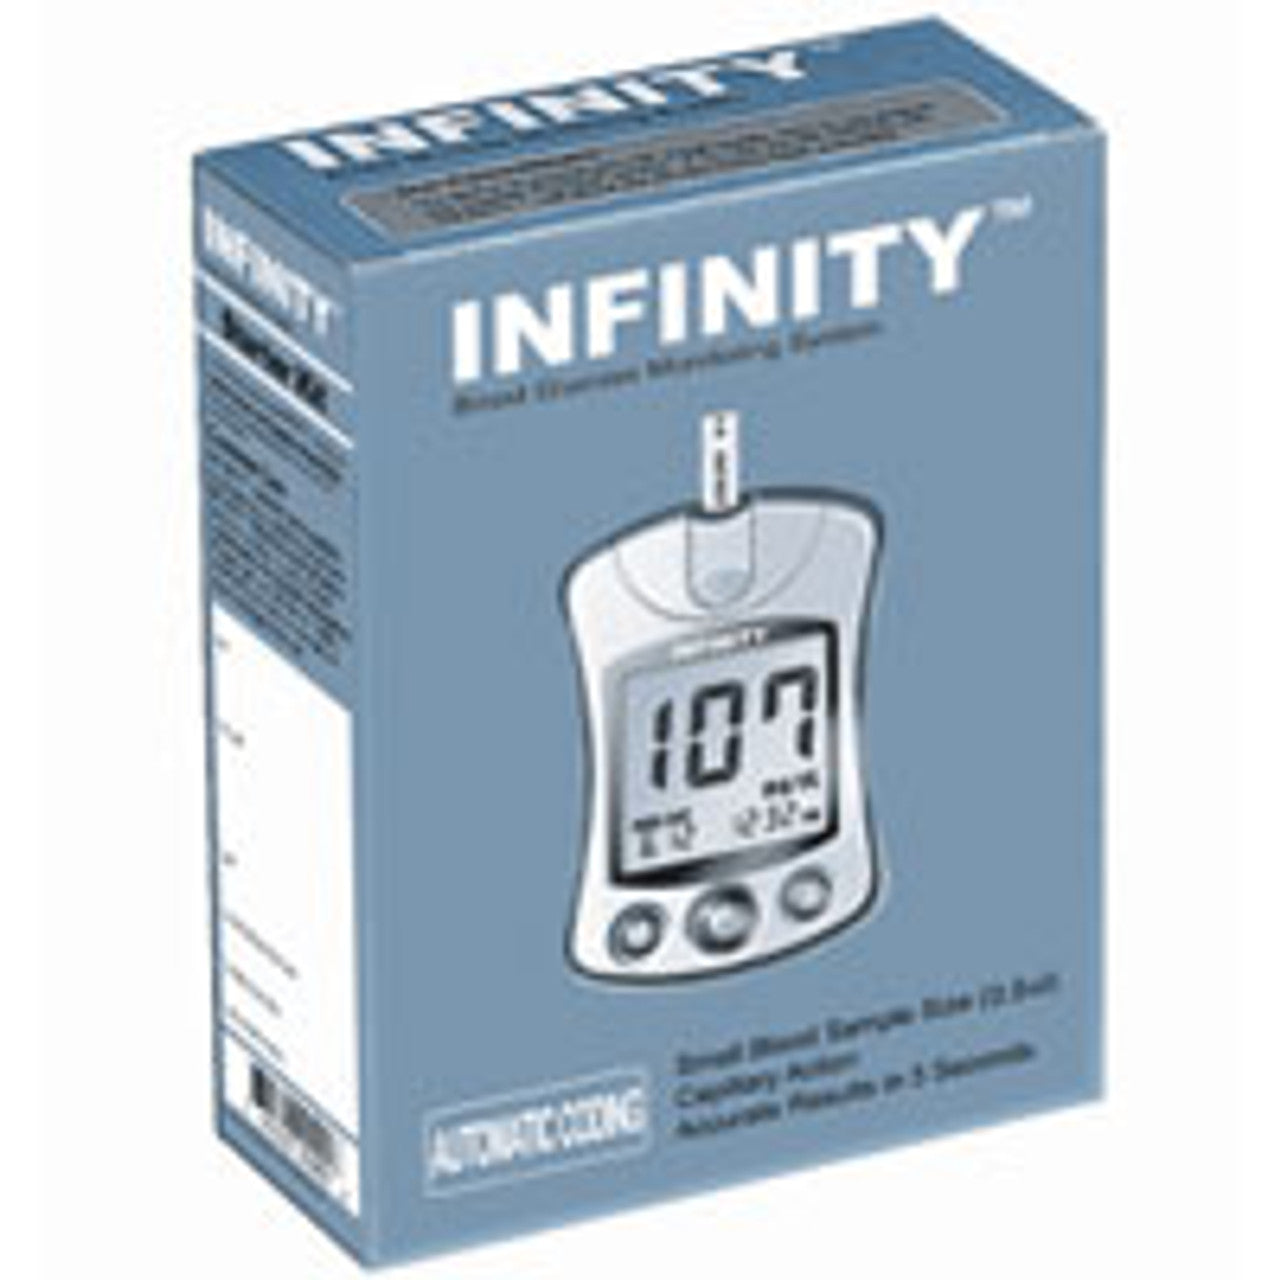 Infinity Automatic Coding Blood Glucose Monitoring System Kit, Model: G5-003Sk - 1 Ea